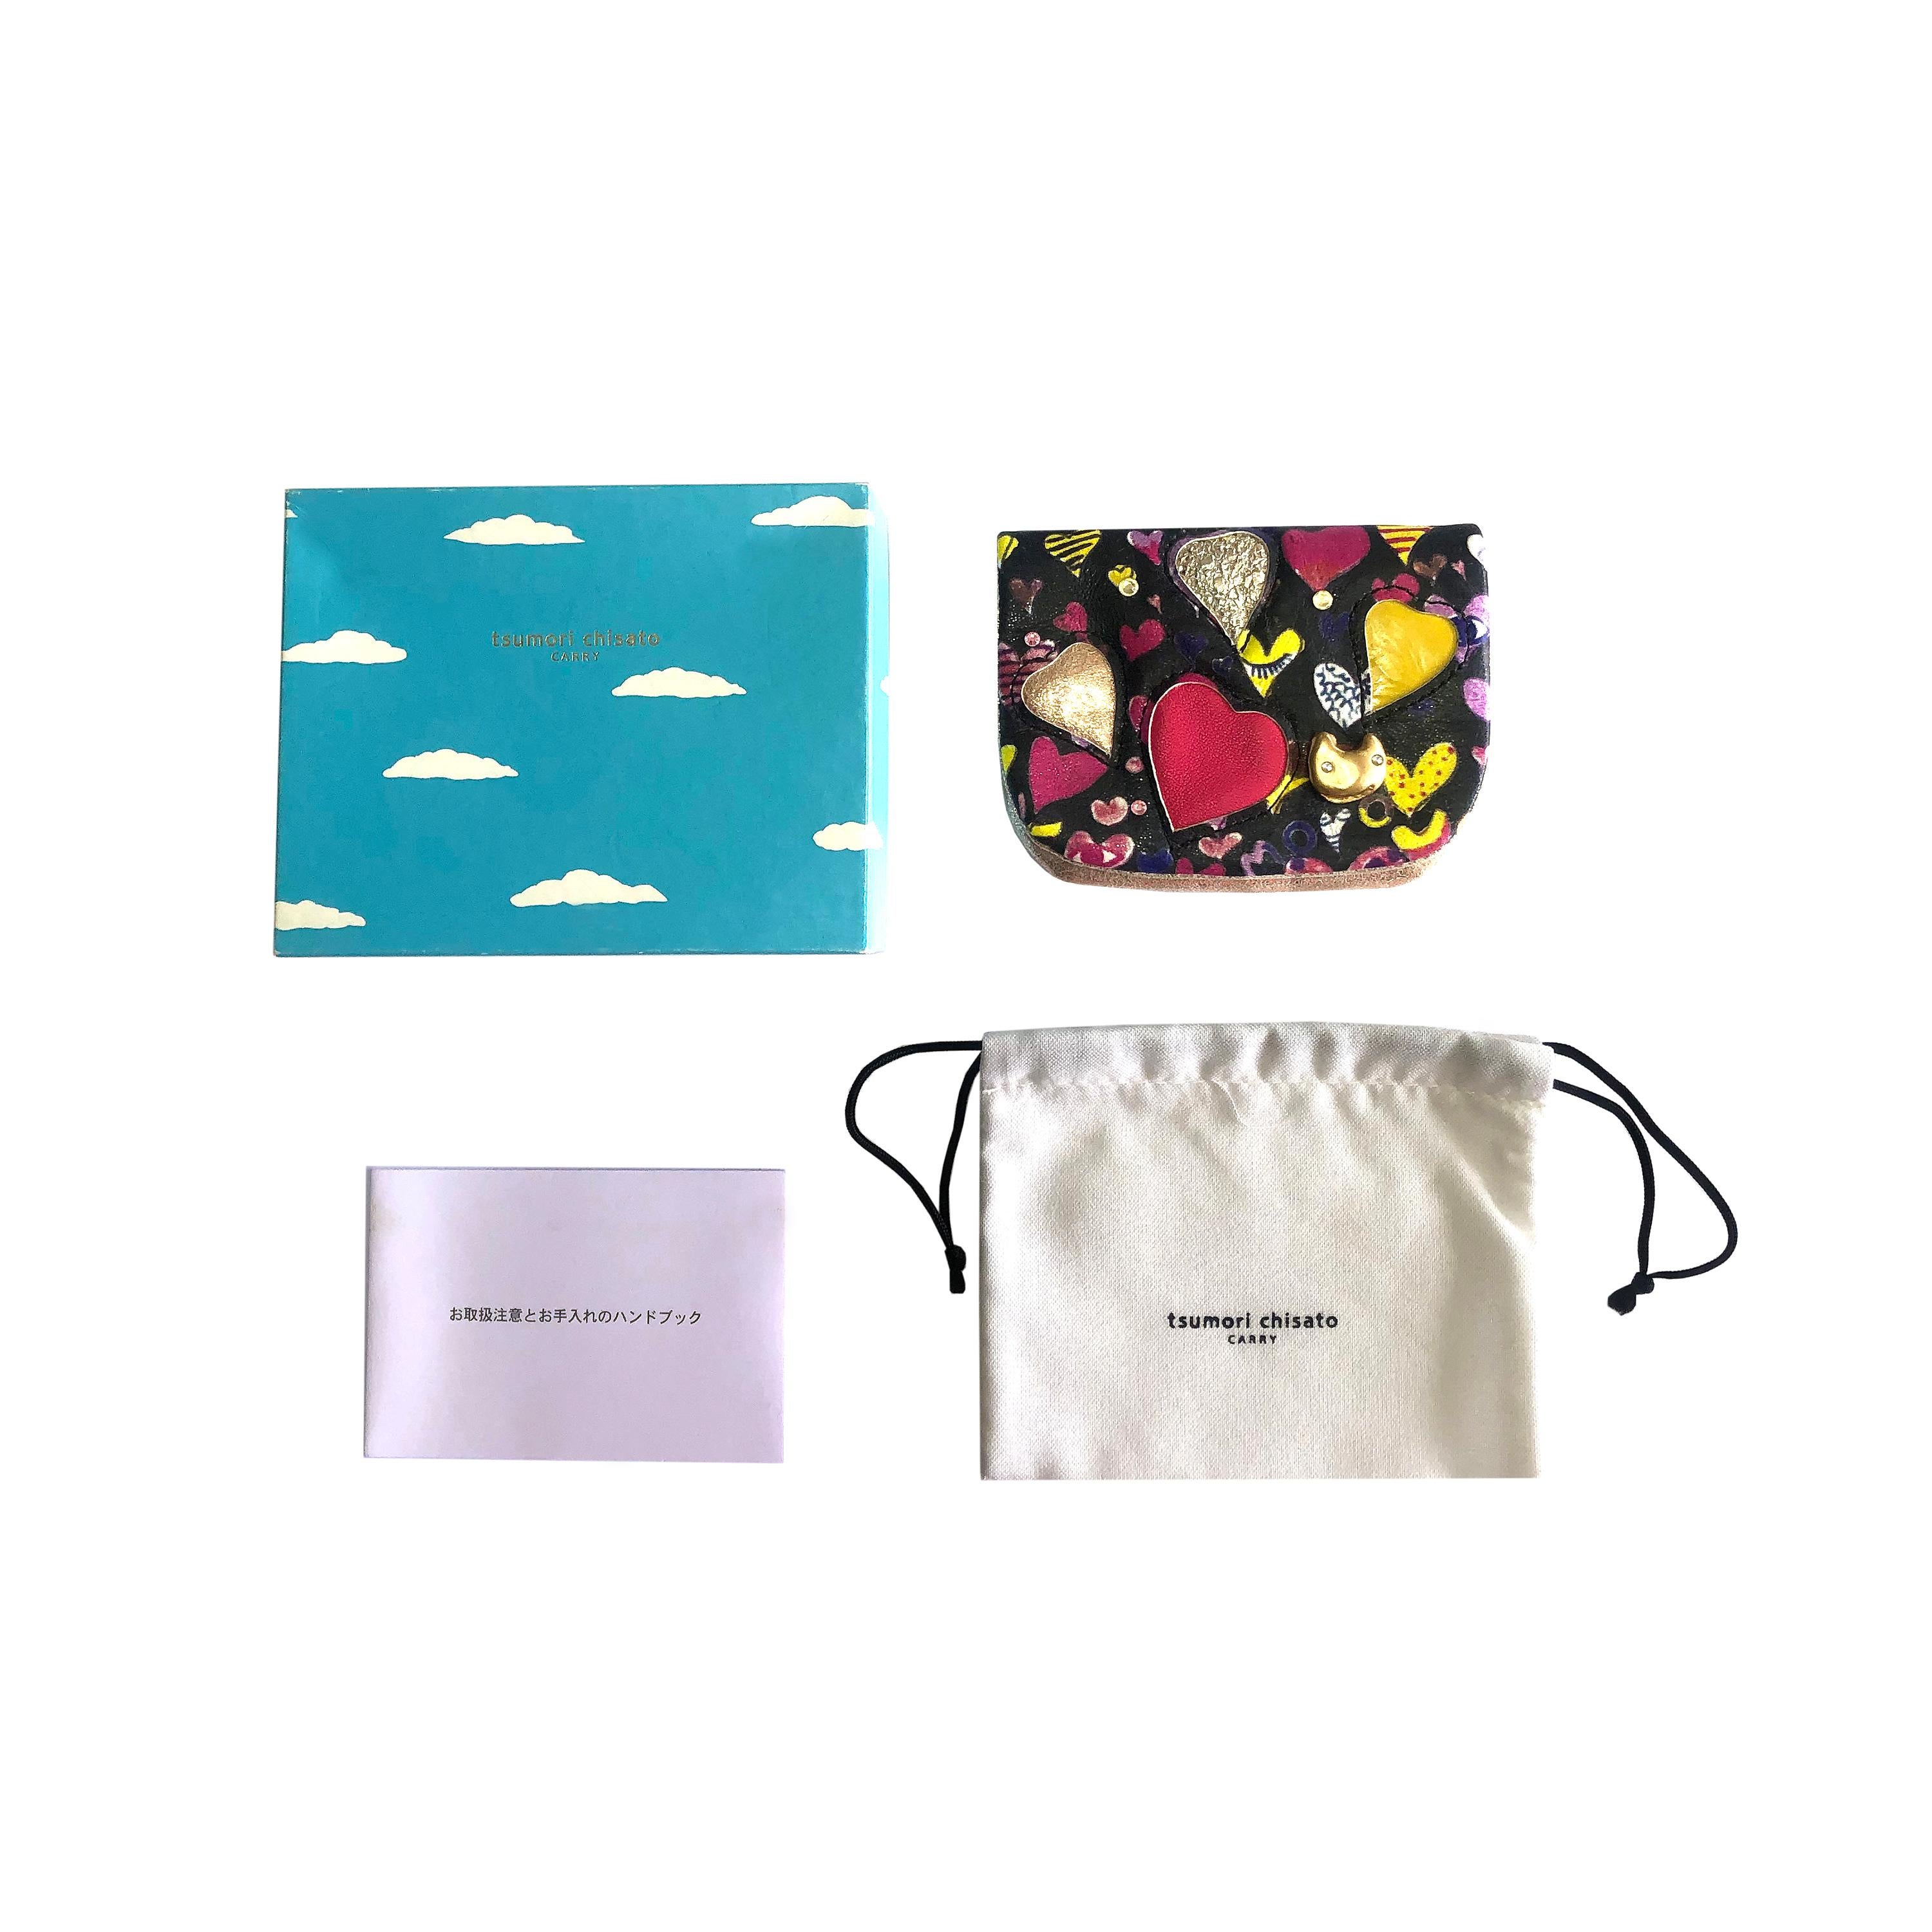 Product Details: Tsumori Chisato - Leather Key Wallet / Purse
- Printed Leather, Rhinestone, Gold Metal & Leather Heart Detailing 
- Gold Cracked Leather Inner Lining + 2 Inner Compartments inc Zipper Fasten 
- x 1 Outer Pocket for Credit Cards 
- 3